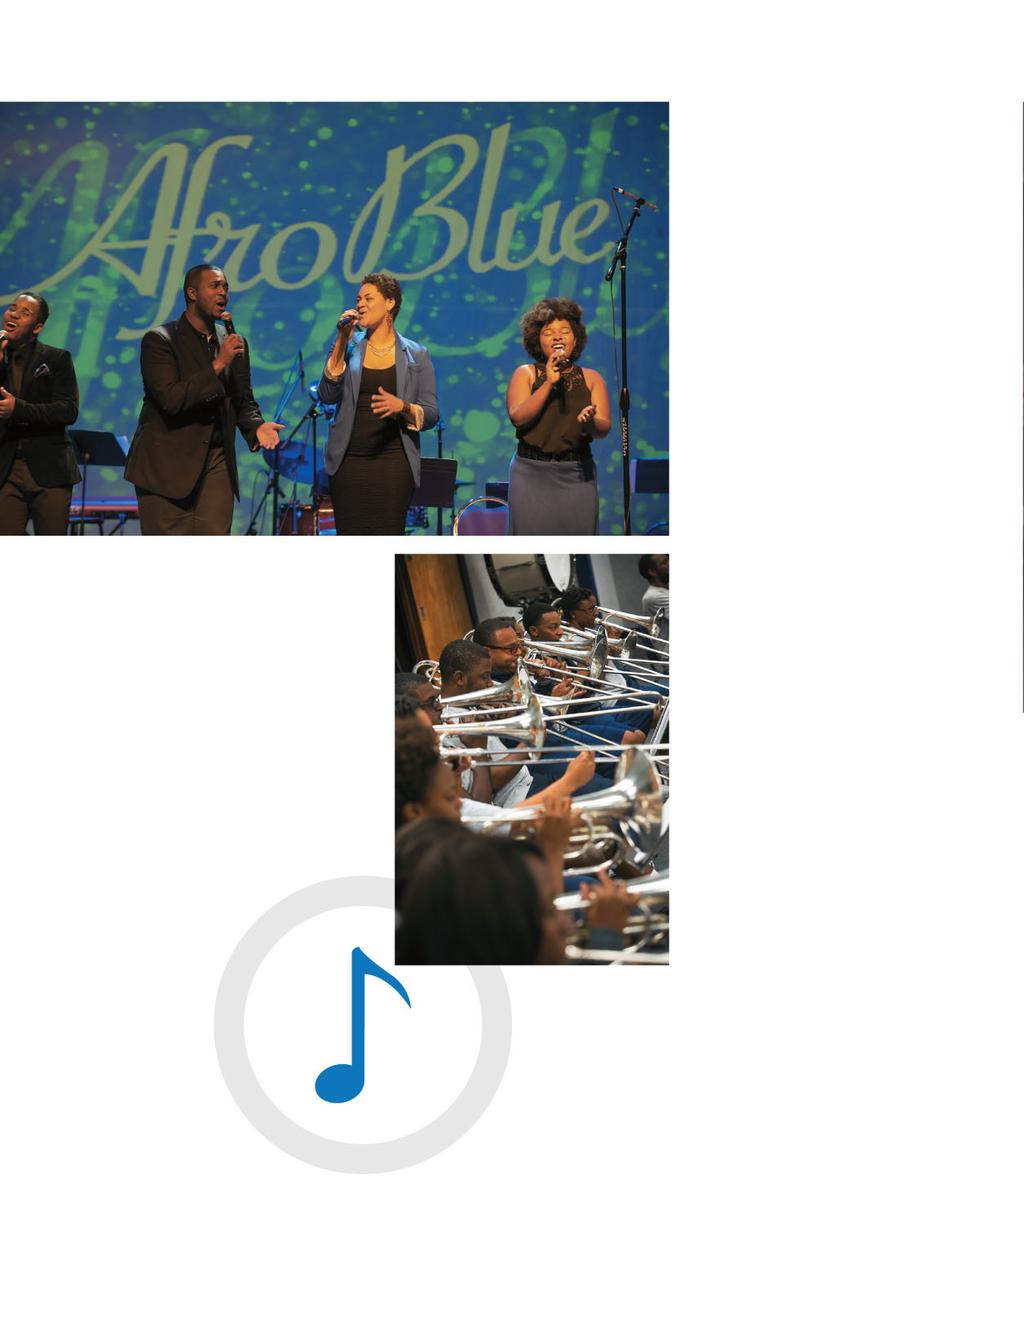 Afro Blue gained national recognition on NBC s The Sing-Off. of the Department of Music. It was the first music program in the Washington, D.C., area to gain membership into the National Association of Schools of Music in 1942.